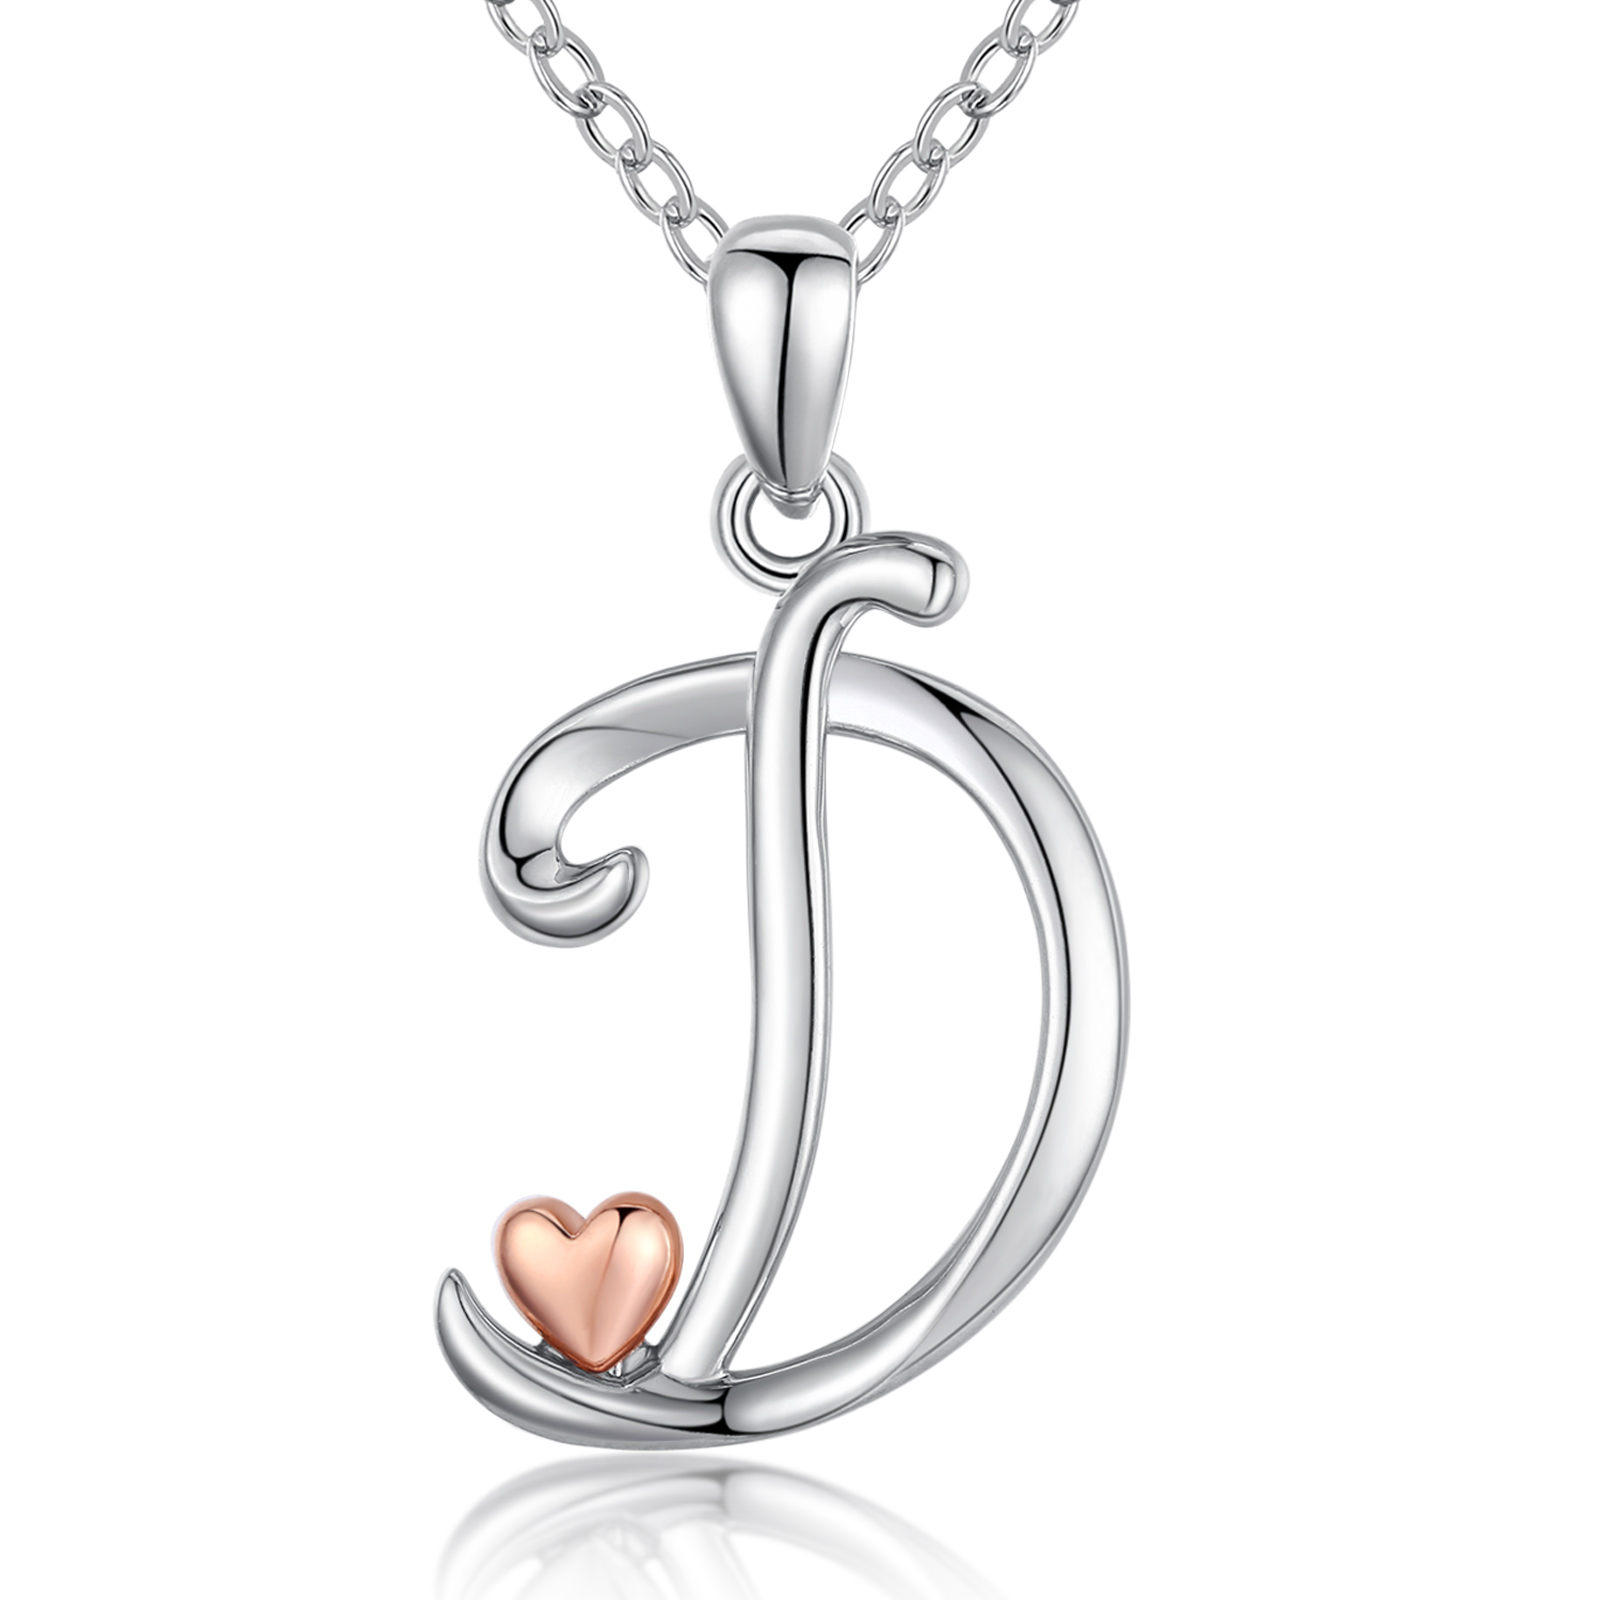 Merryshine Jewelry s925 sterling silver plated rhodium large initial letter D necklace alphabet charm pendant